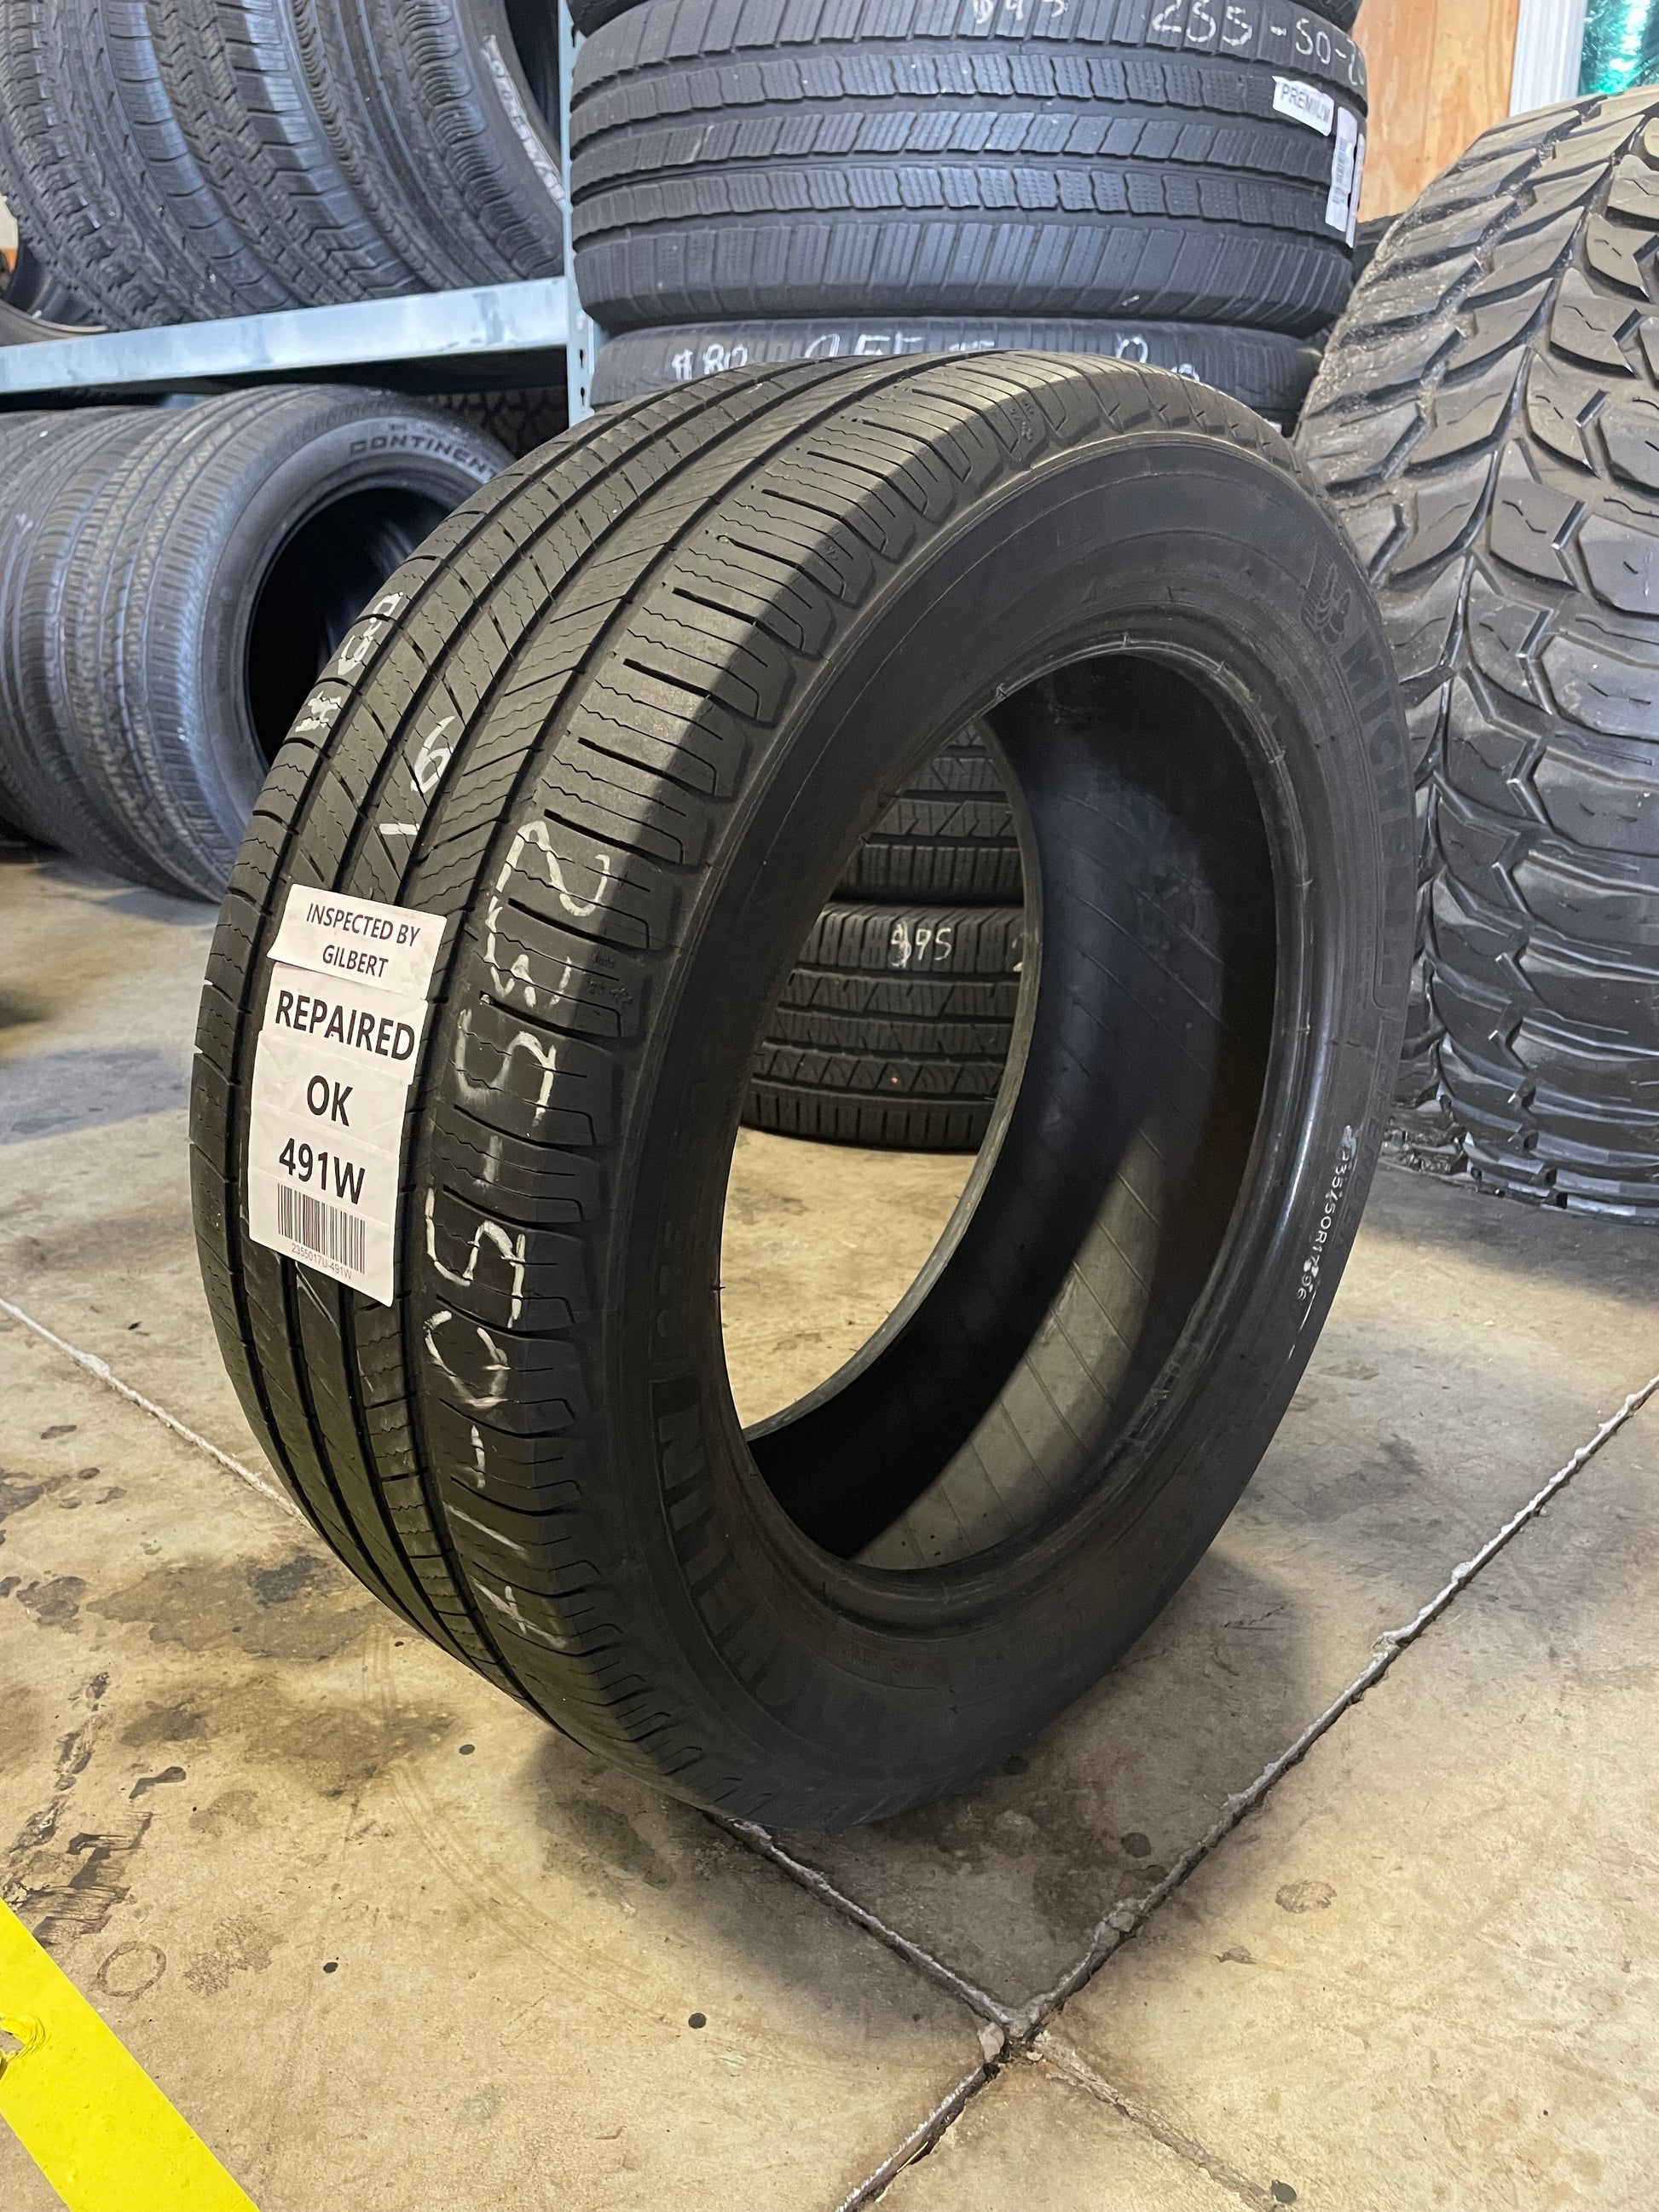 SINGLE 235/50R17 Michelin Defender T+H 96 H SL - Used Tires